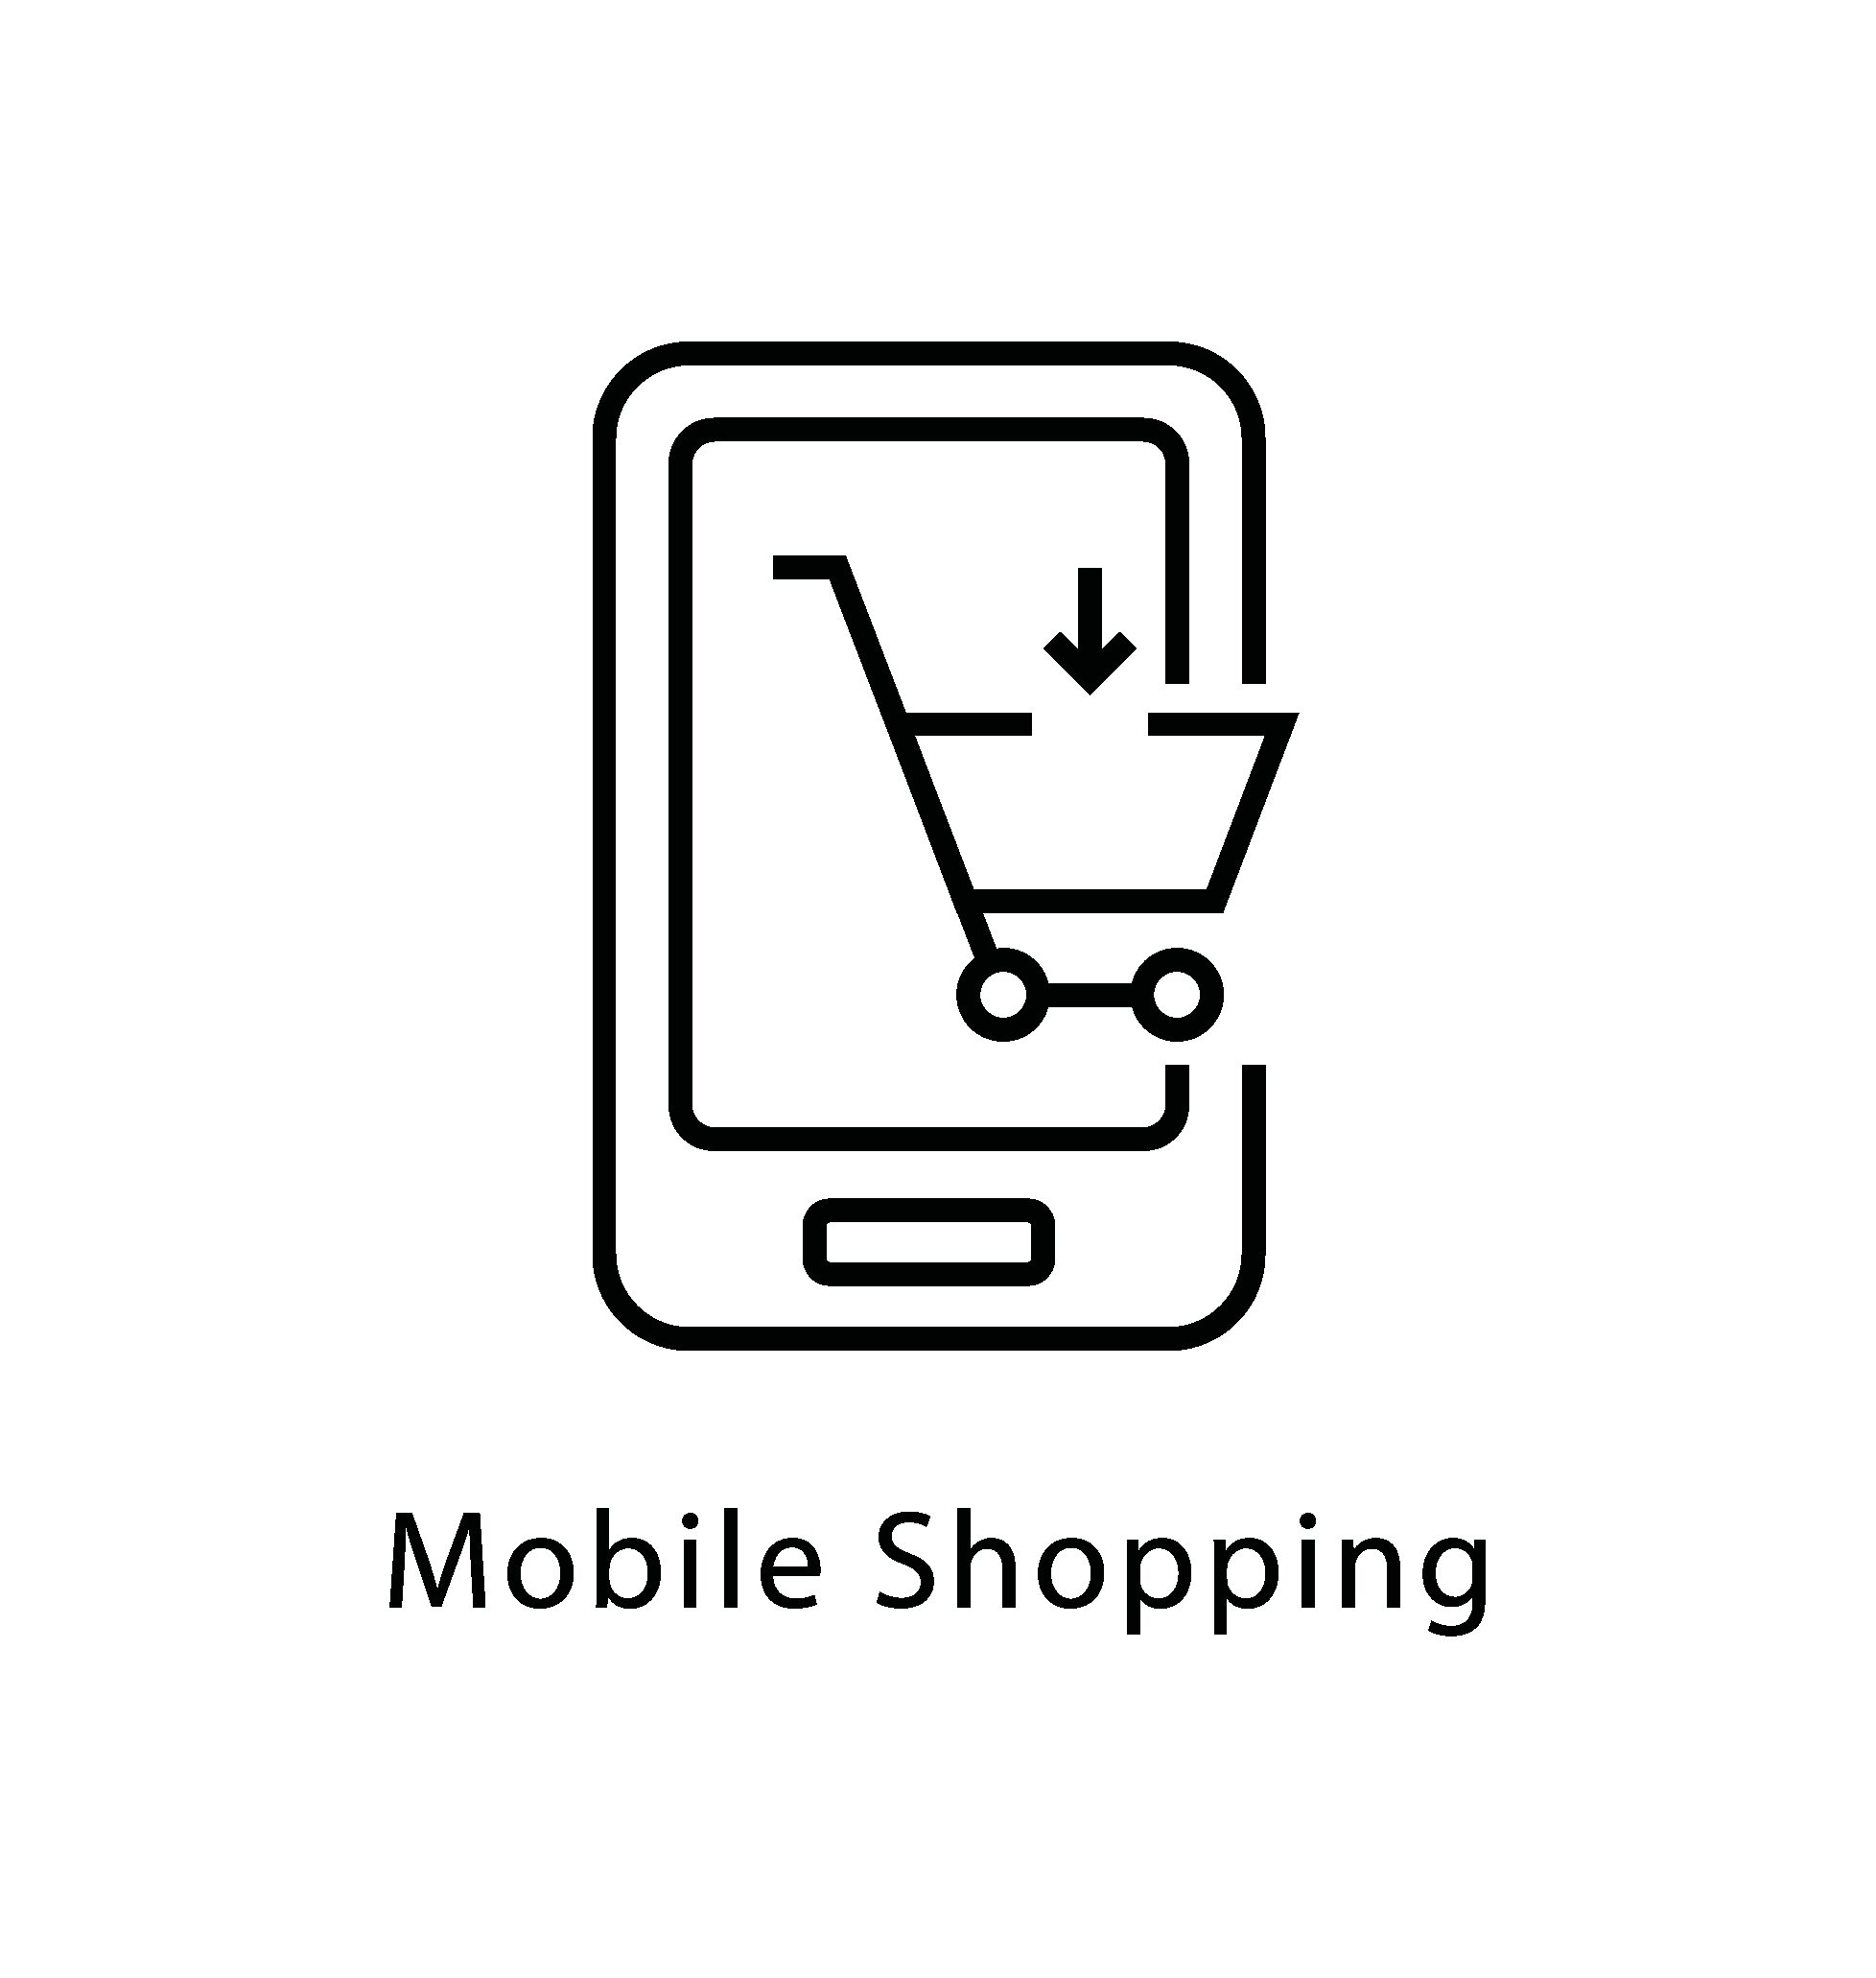 mobile shopping apps how retailers can improve the customer experience pdf - Mobile shopping apps: How retailers can improve the customer experience